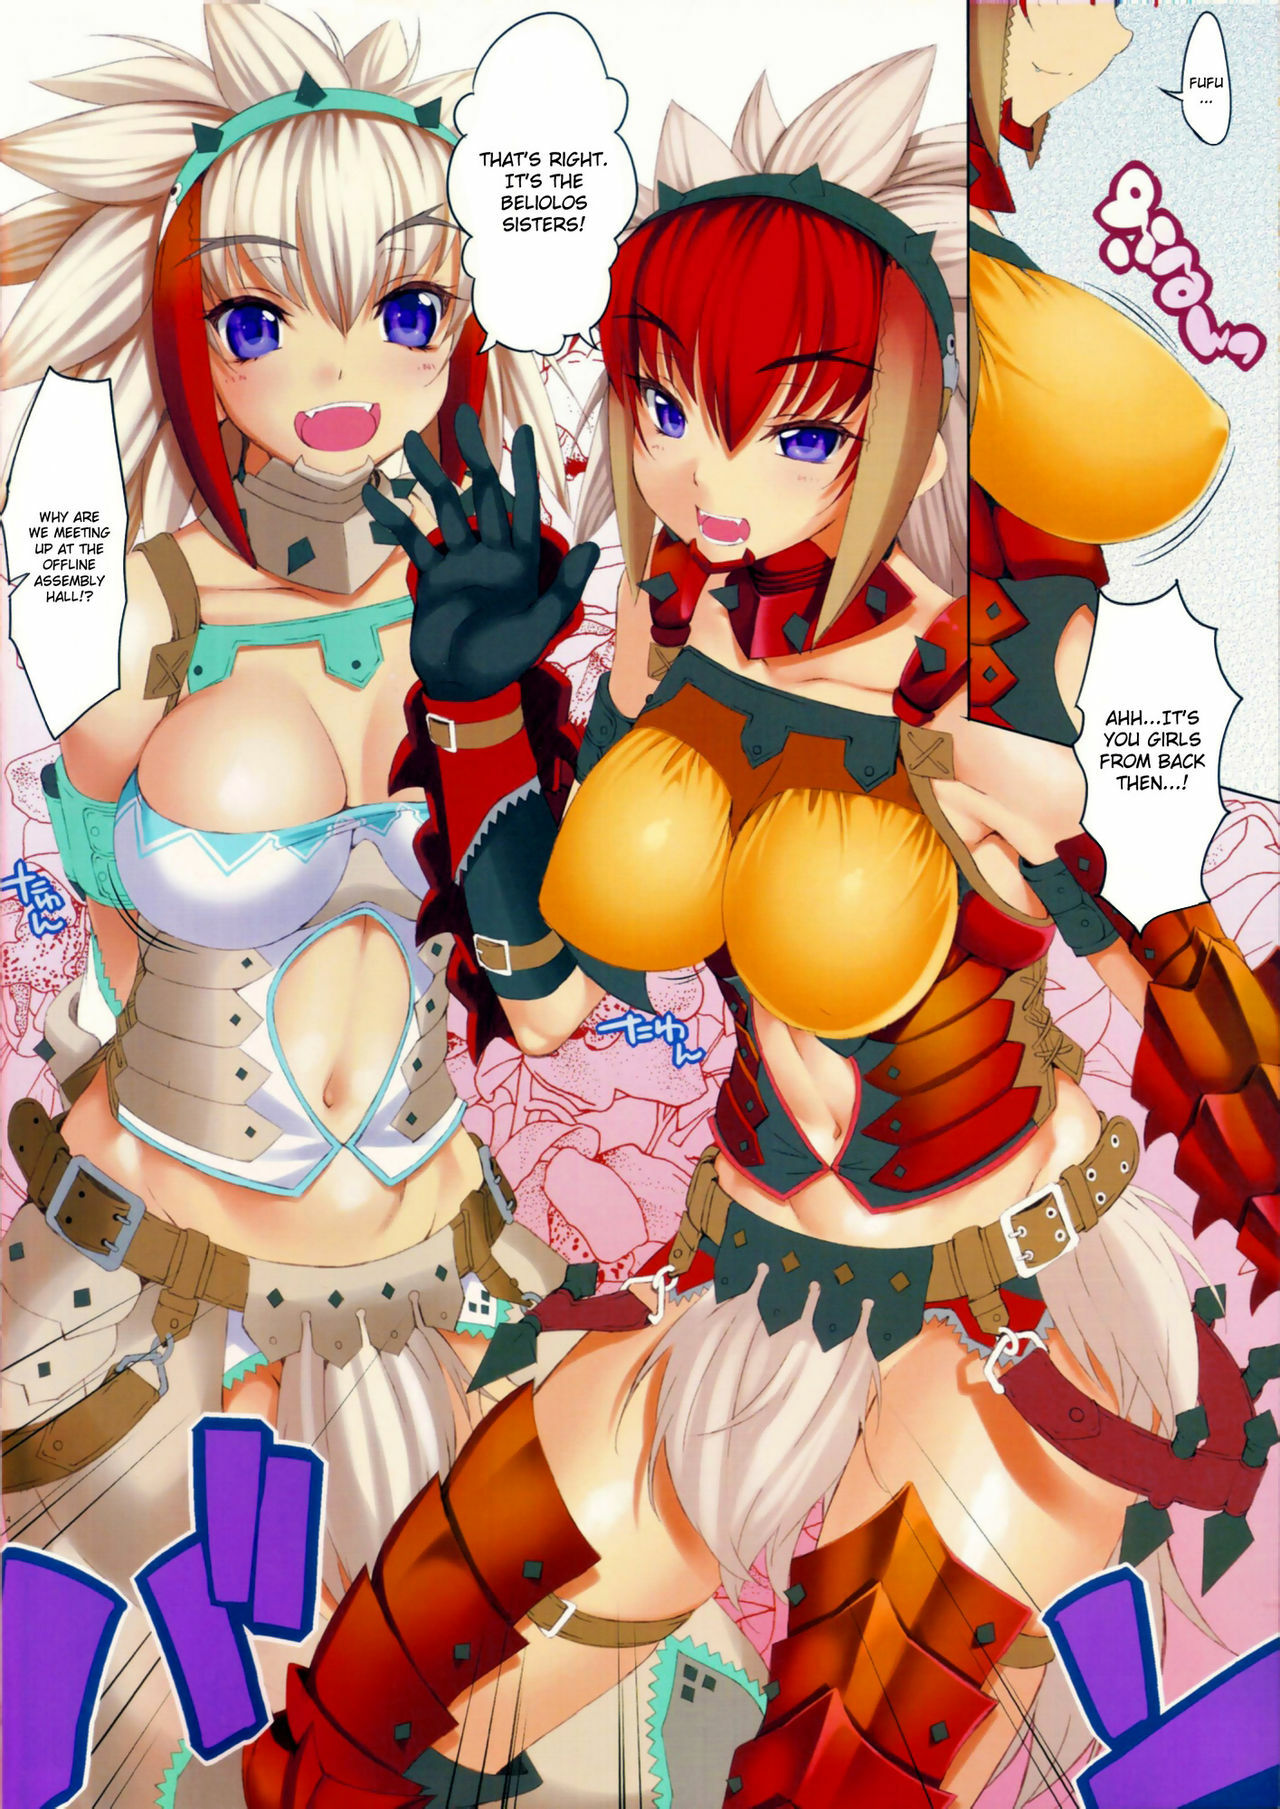 (SC52) [Clesta (Cle Masahiro)] CL-orz 15 (Monster Hunter) [English] [CGrascal] [Decensored] page 5 full